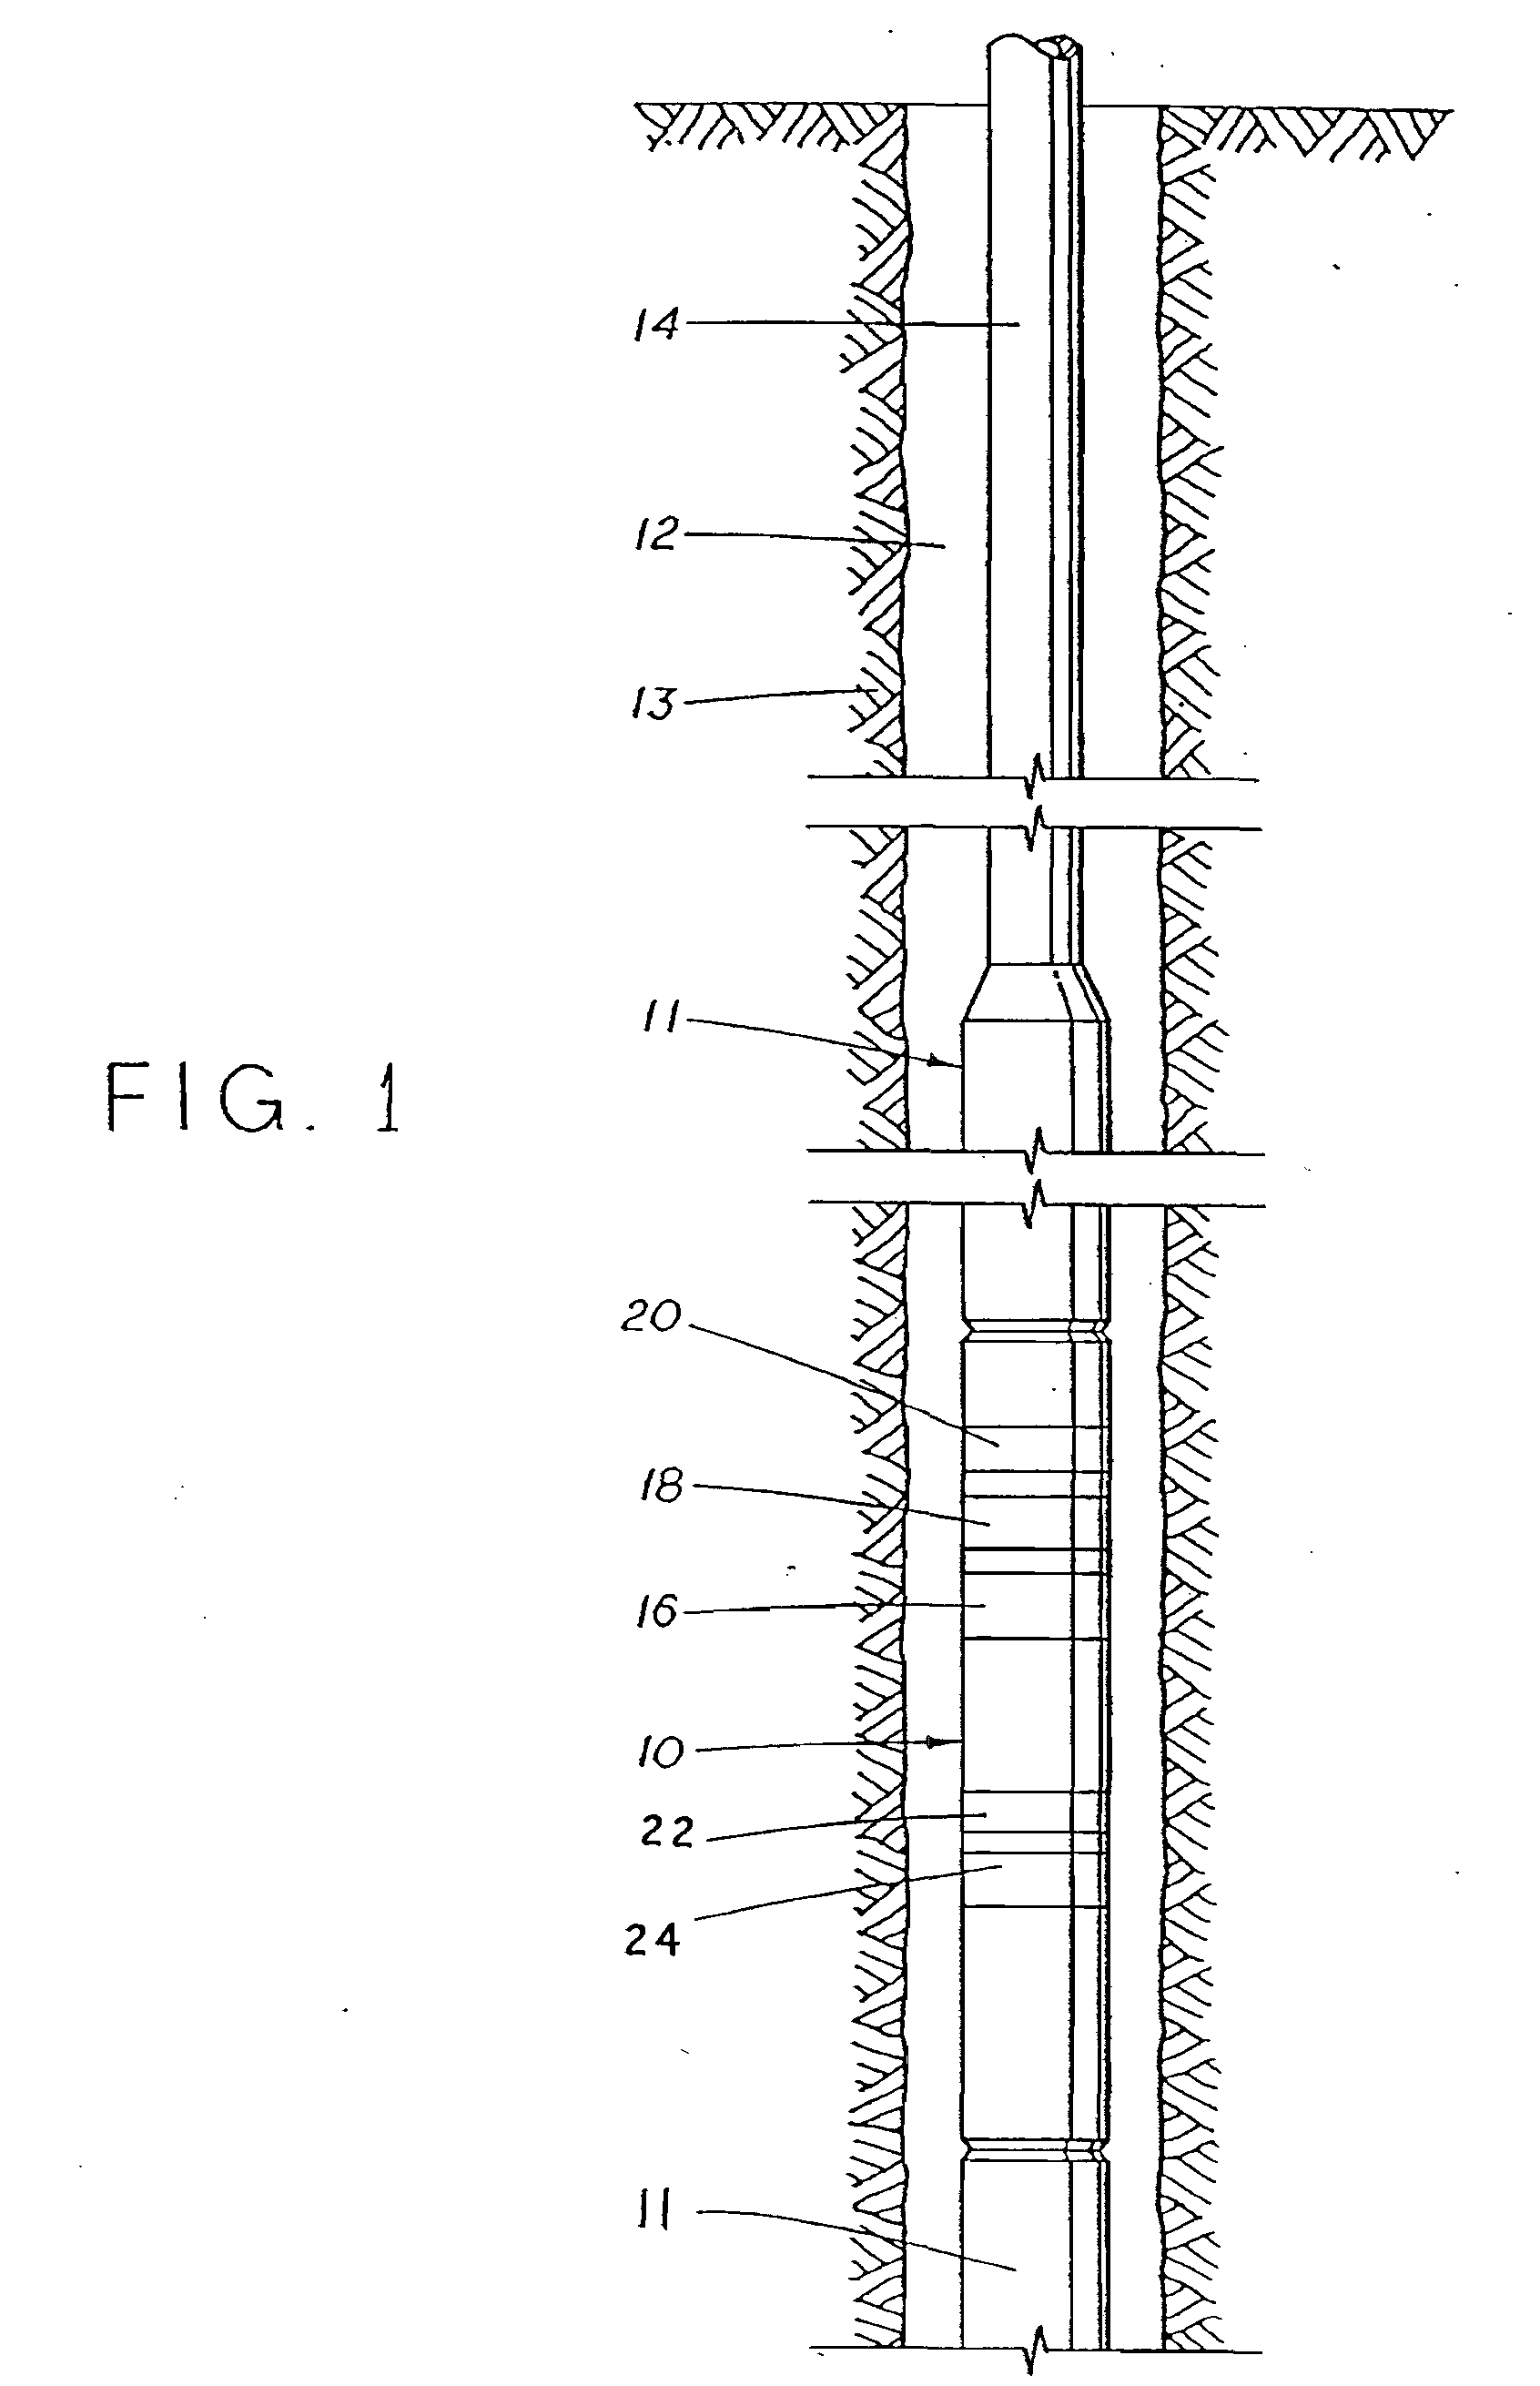 Electromagnetic Wave Resistivity Tool Having a Tilted Antenna for Geosteering Within a Desired Payzone